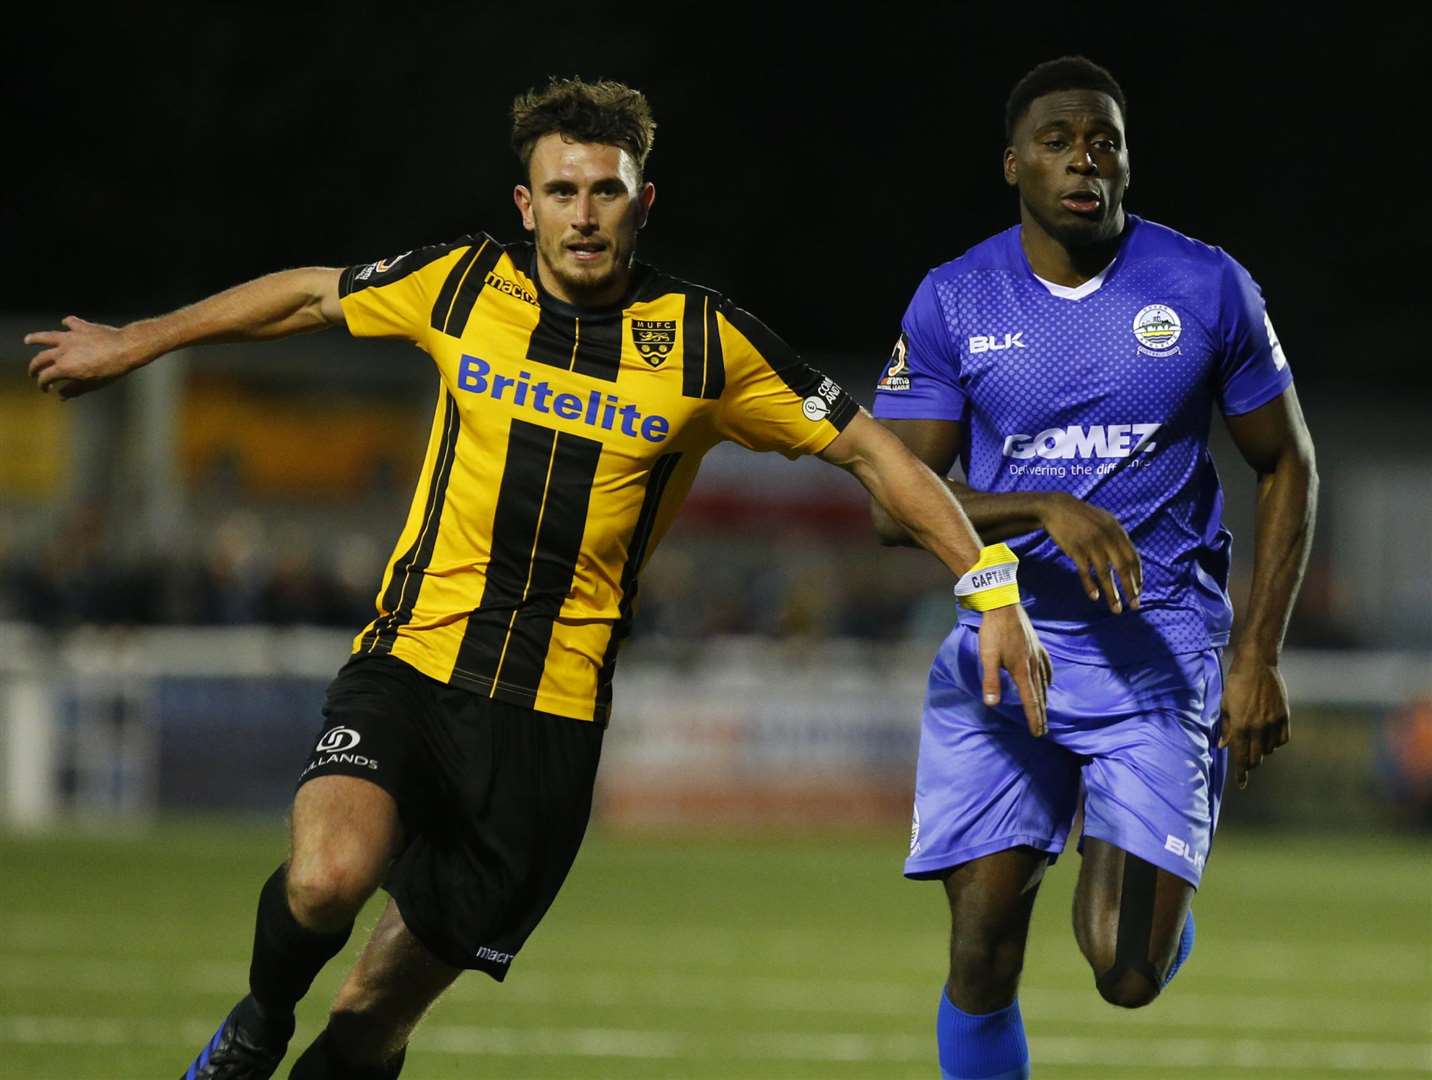 The armband is slipping here but Will De Havilland will be Maidstone captain while Blair Turgott recovers Picture: Andy Jones